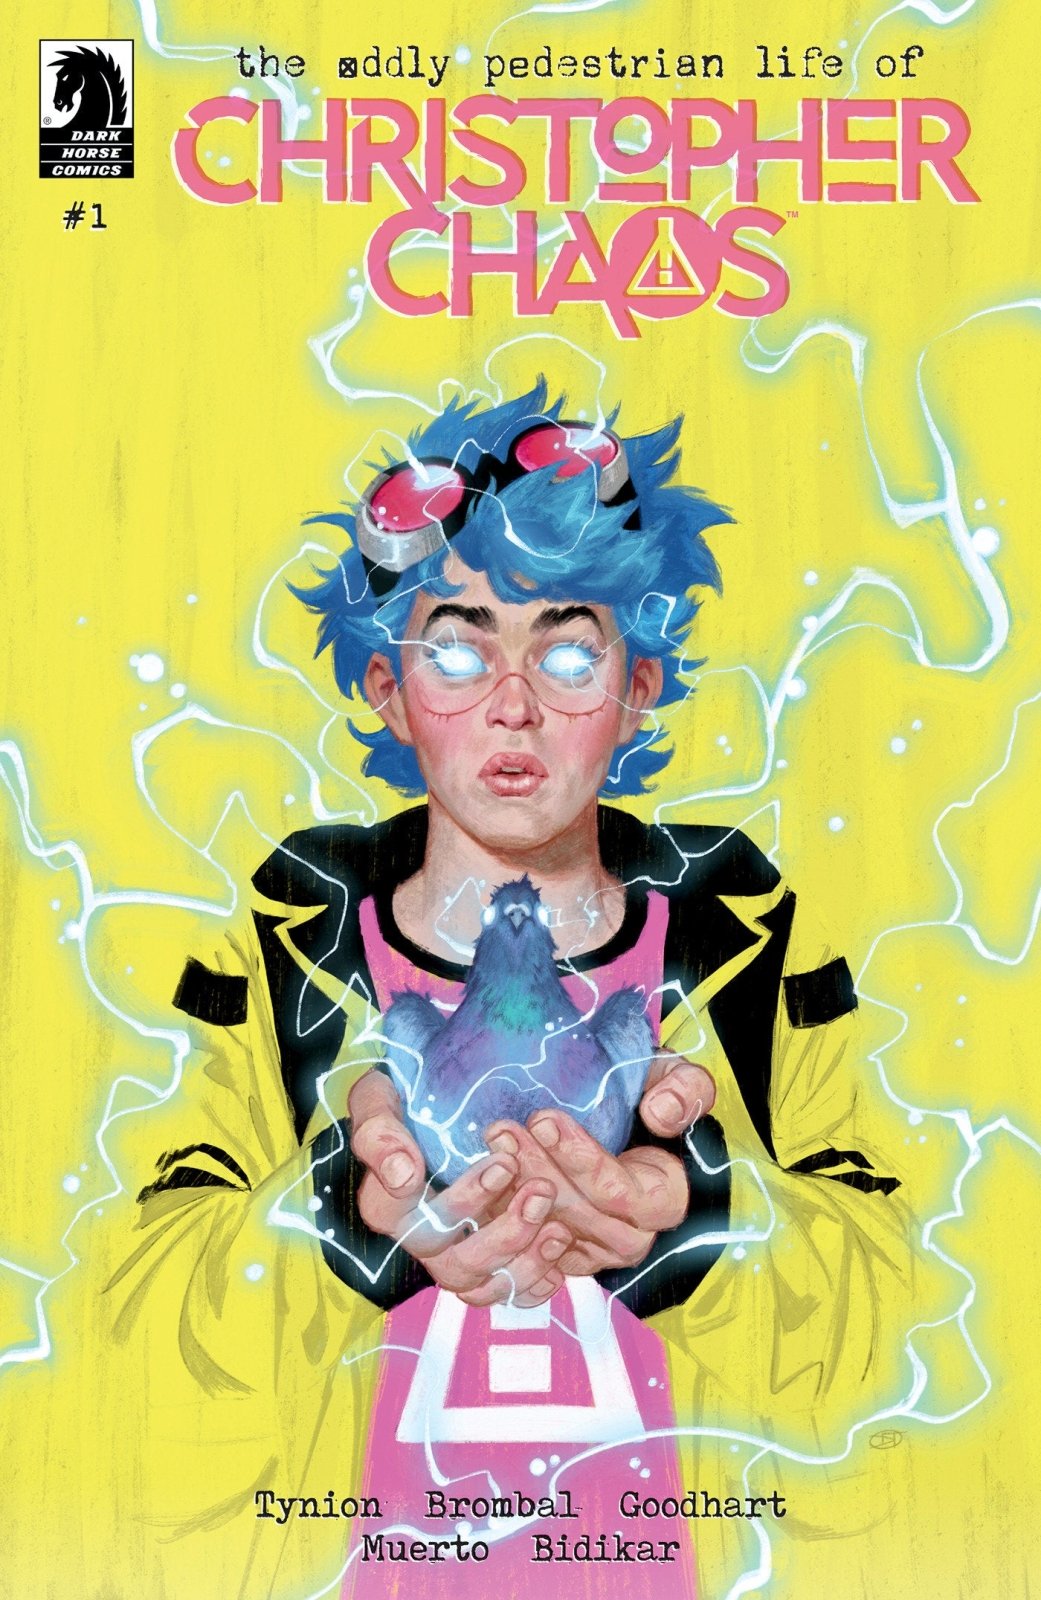 The Oddly Pedestrian Life Of Christopher Chaos #1 (Cover D) (David Talaski) - The Fourth Place